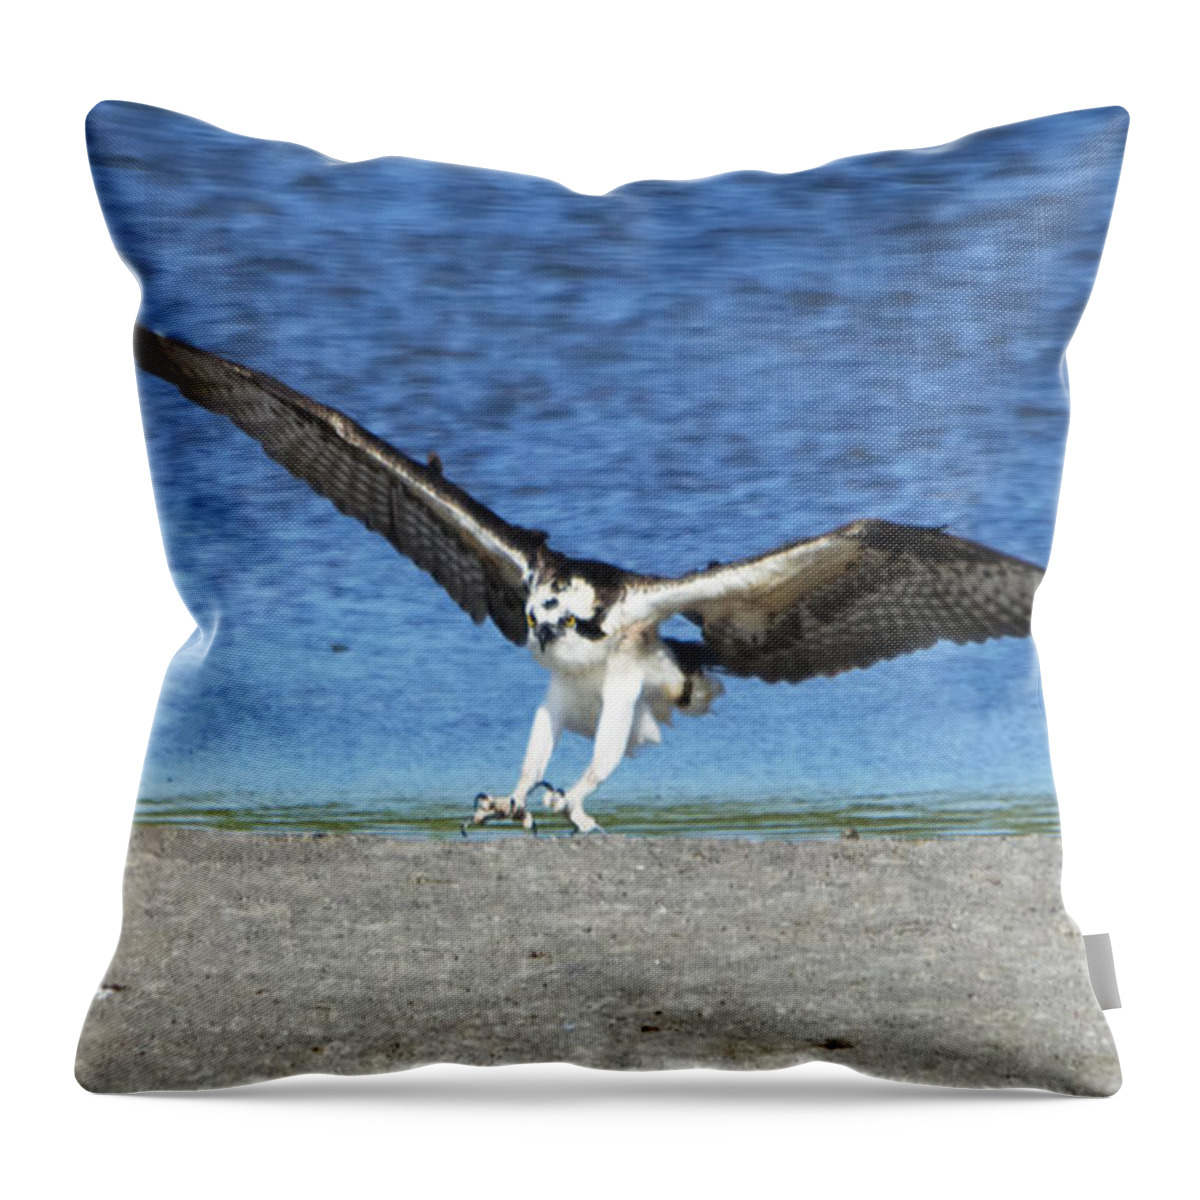 Wildlife Throw Pillow featuring the photograph Swooping Osprey by Kenneth Albin